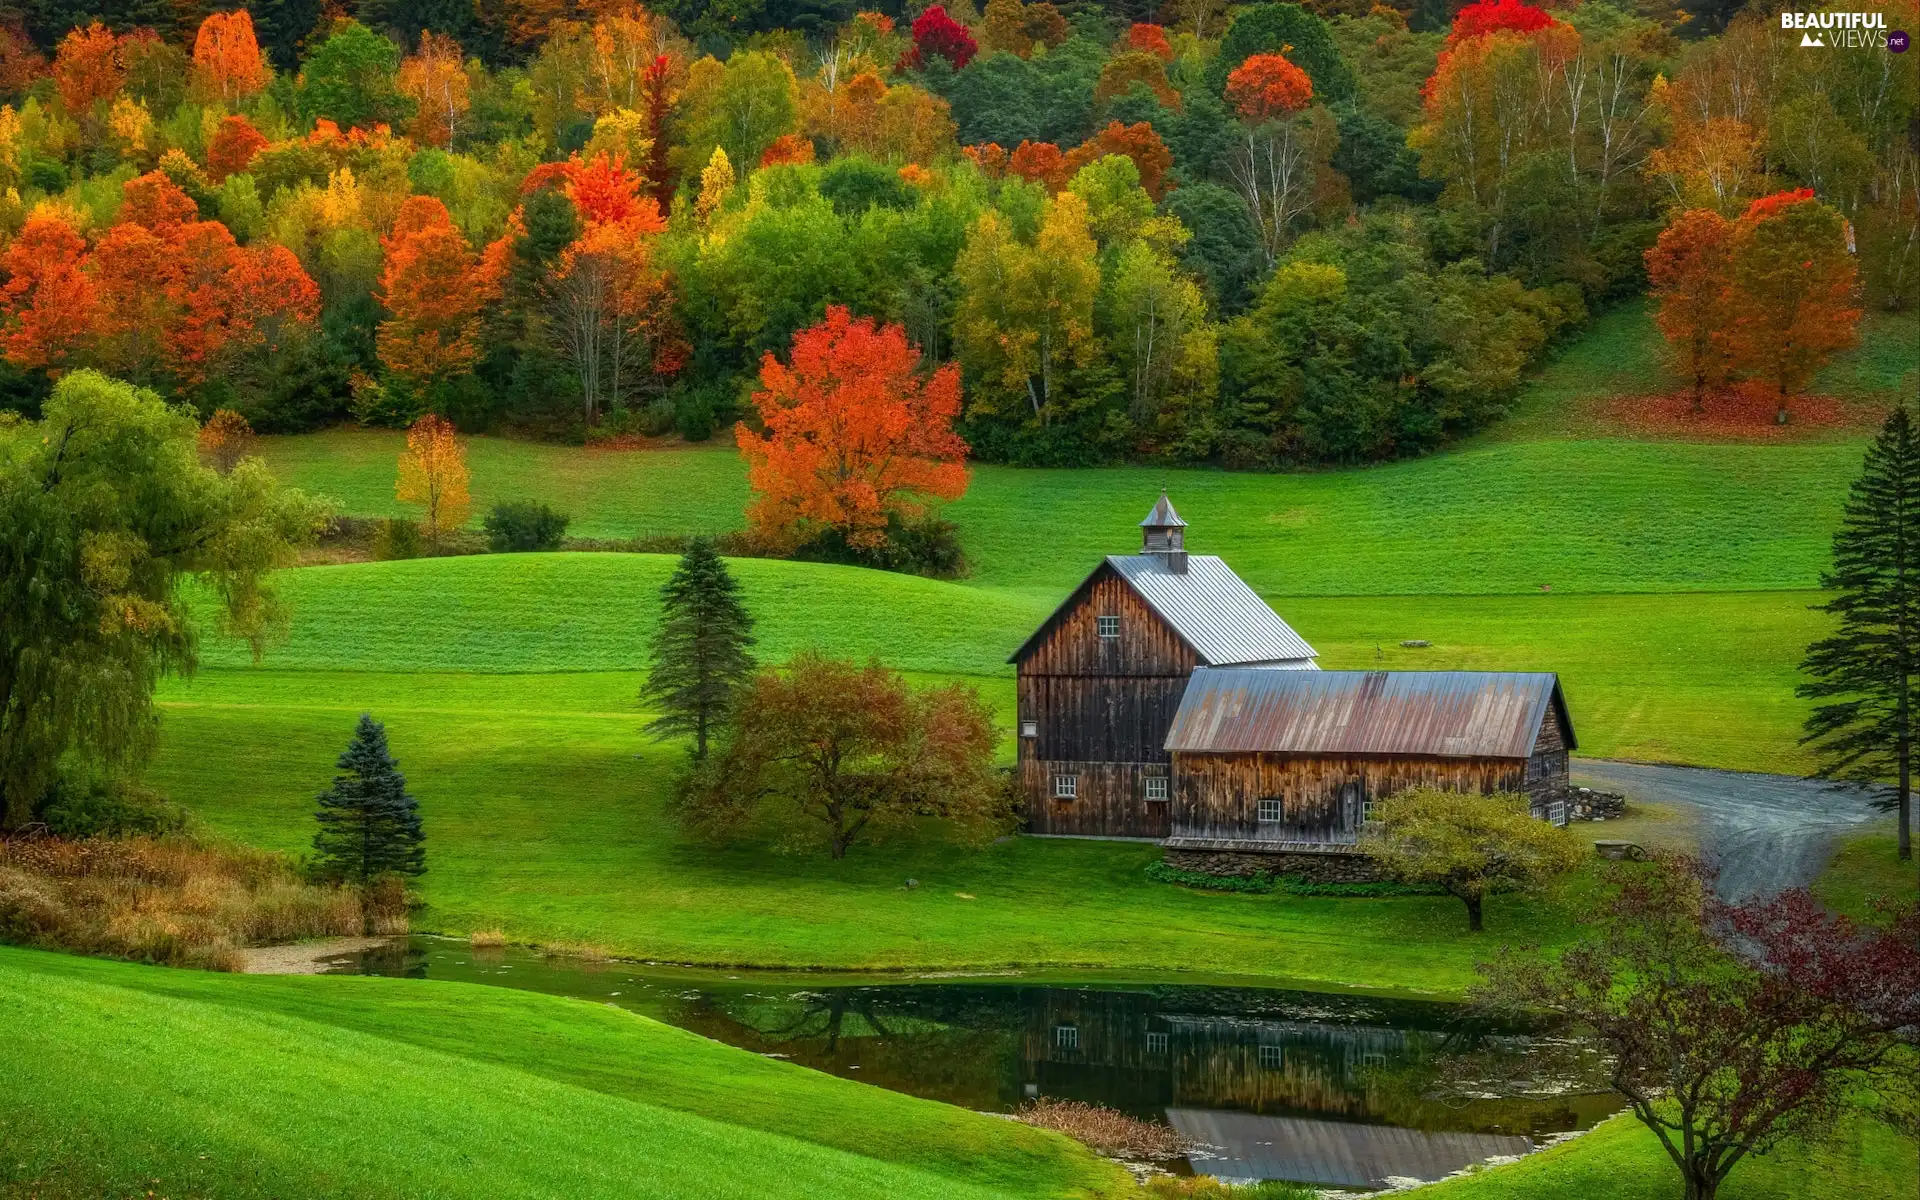 viewes, State of Vermont, The Hills, Pond - car, Houses, The United States, New England, country, autumn, trees